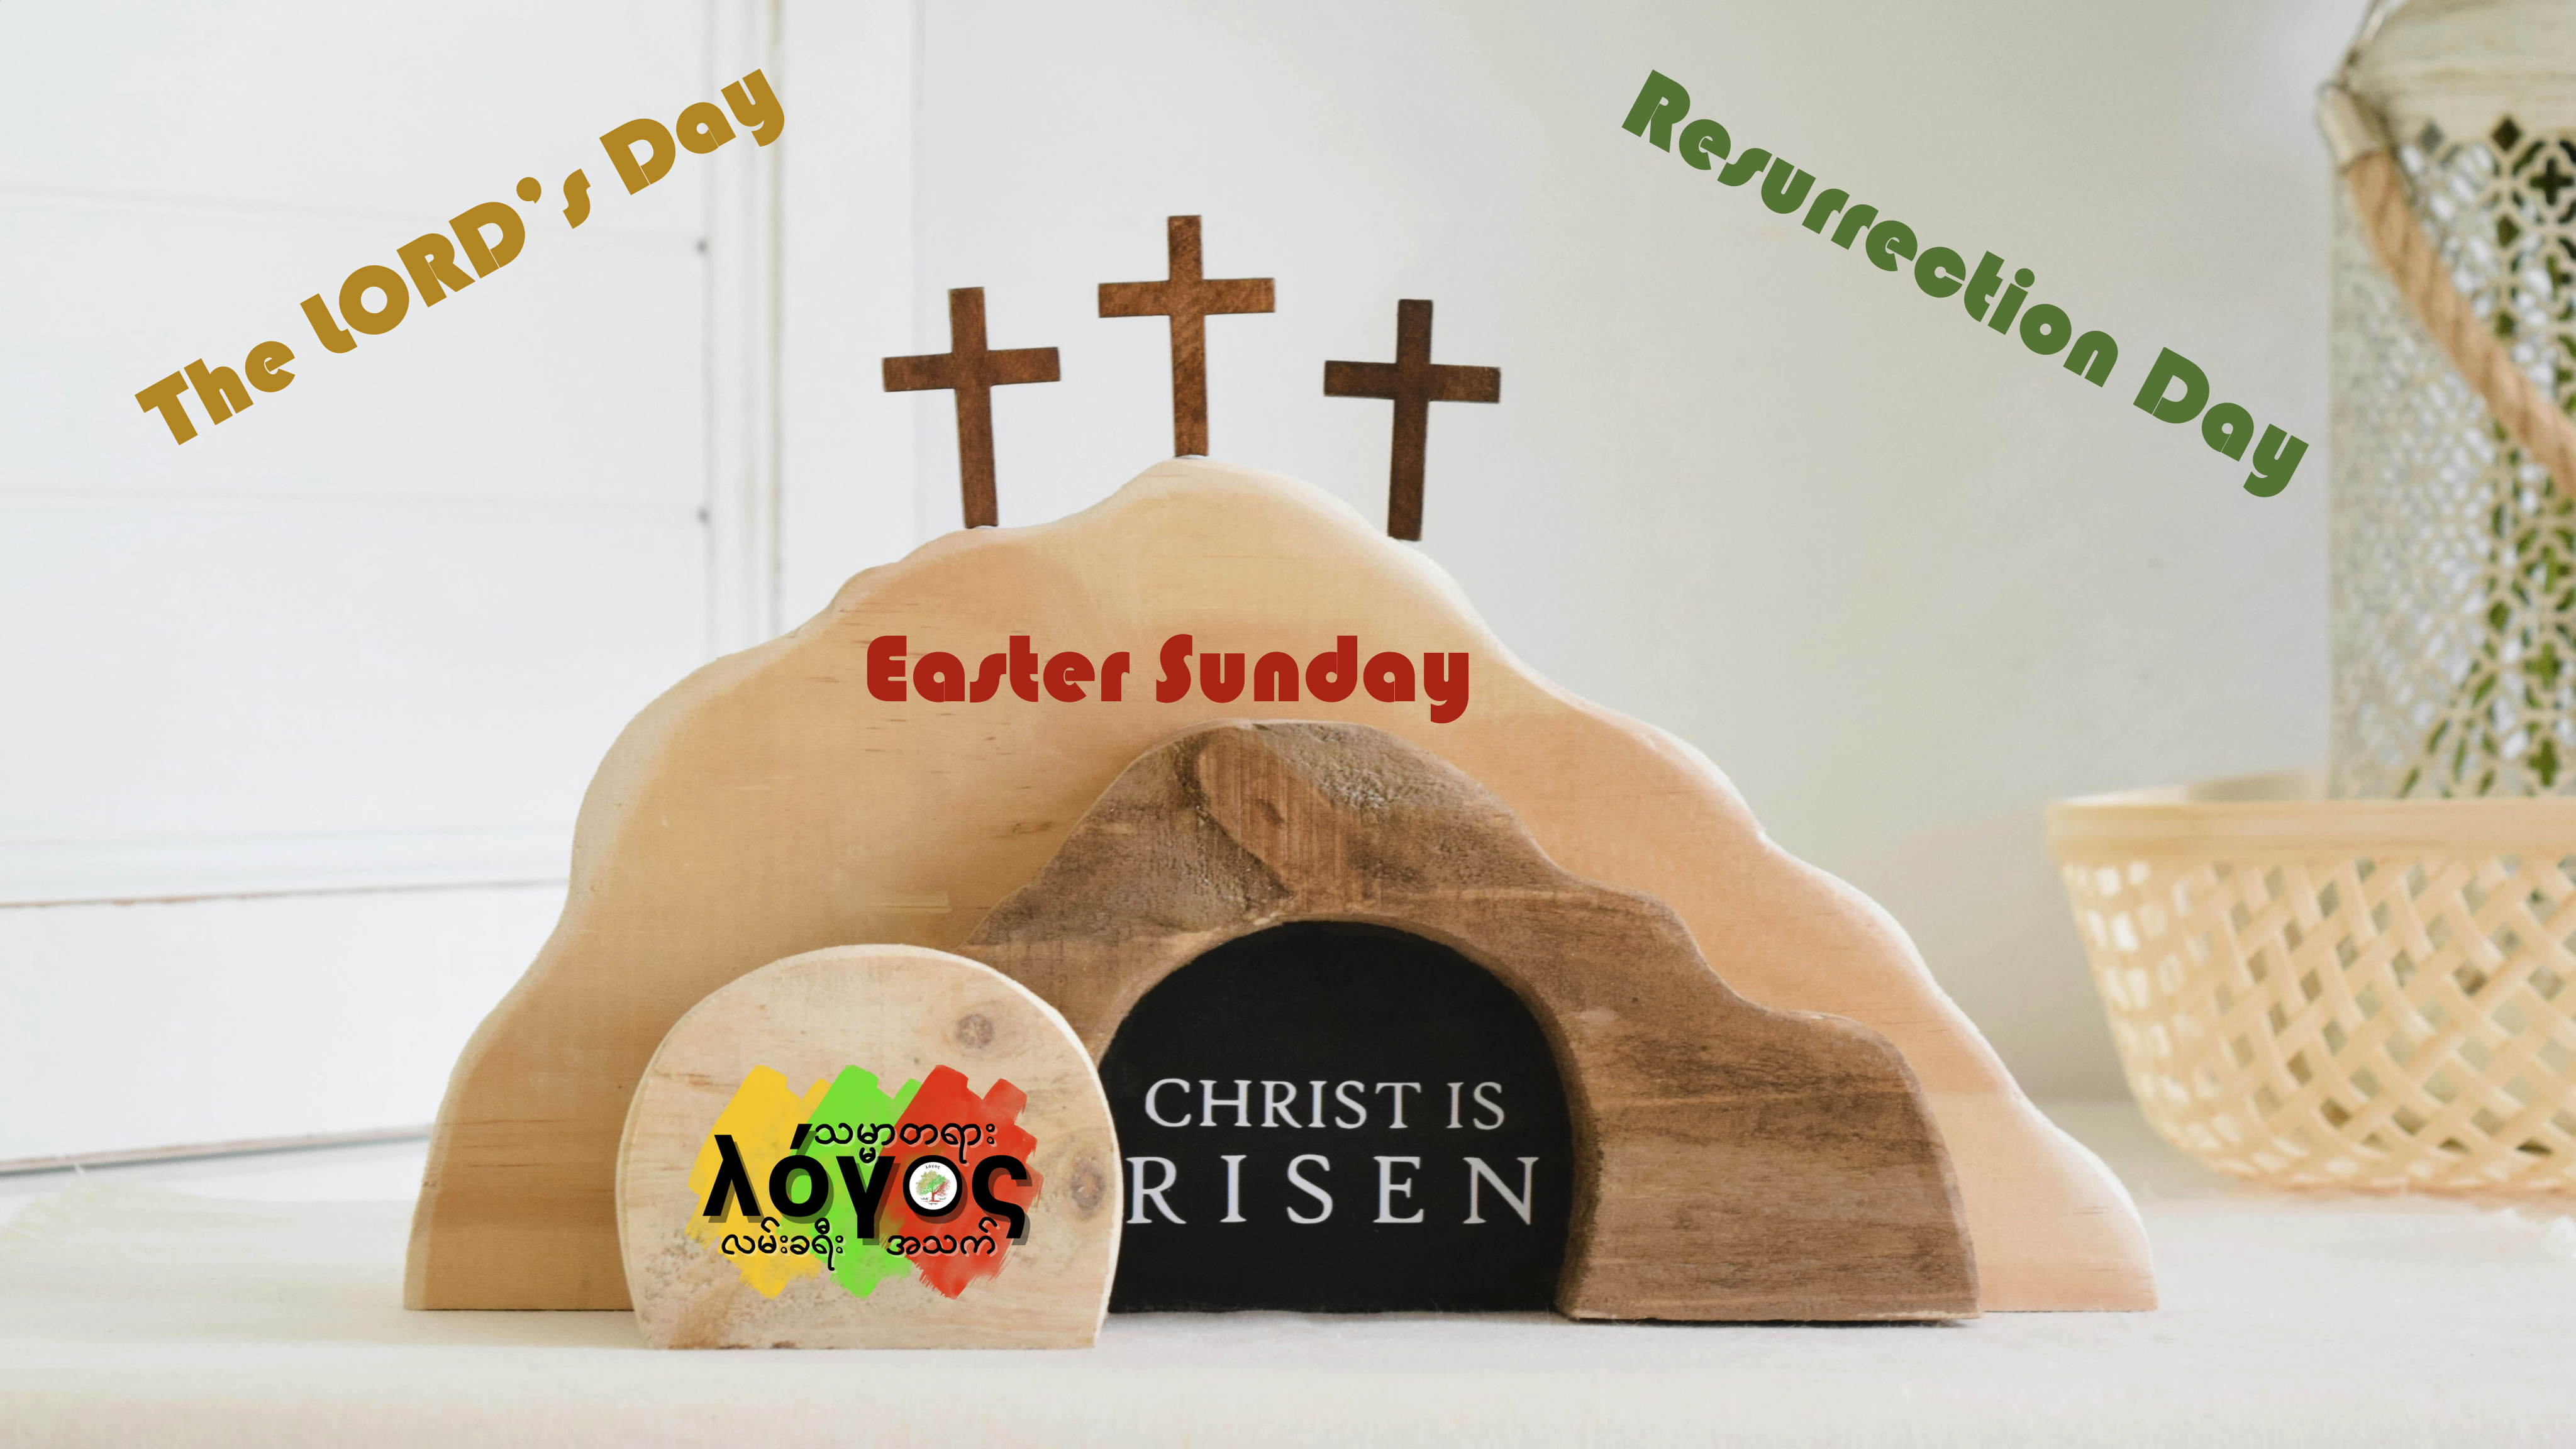 The LORD-s Day or Resurrection Day or Easter Sunday